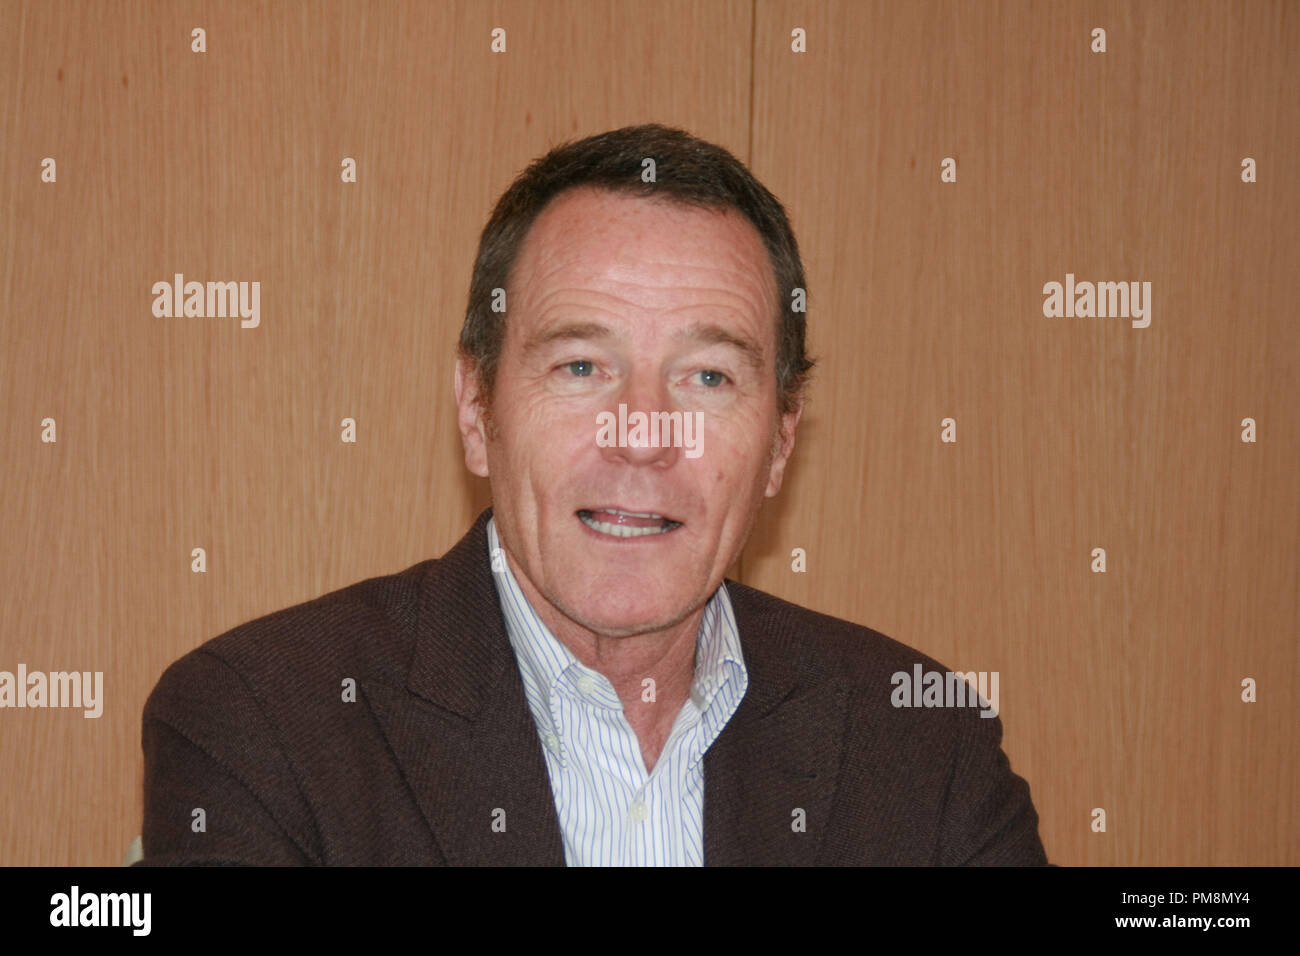 Bryan Cranston   'Argo' Portrait Session, September 8, 2012.  Reproduction by American tabloids is absolutely forbidden. File Reference # 31669 016JRC  For Editorial Use Only -  All Rights Reserved Stock Photo